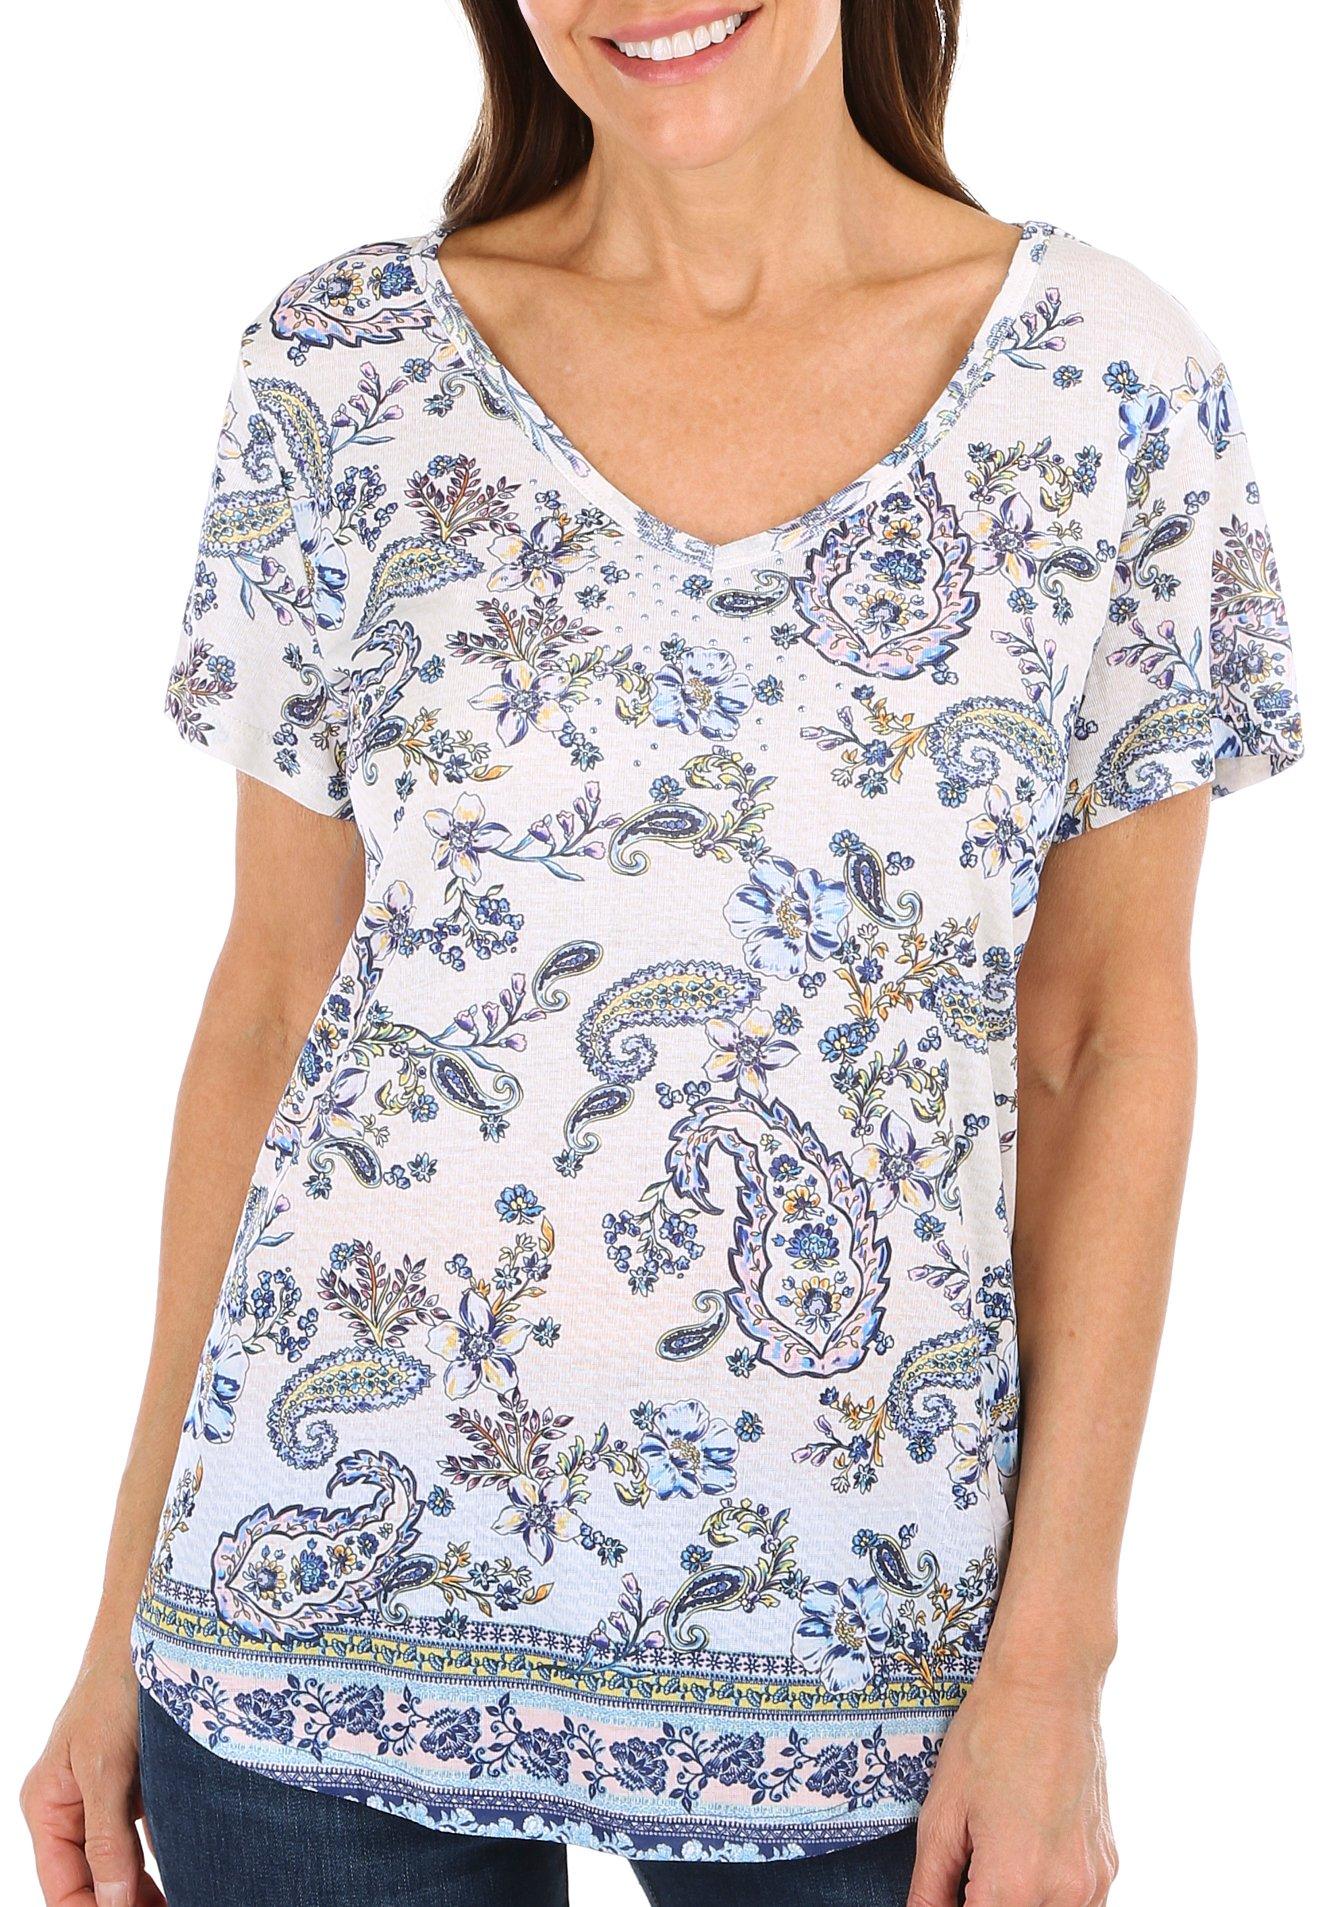 Coral Bay Womens Floral Paisley V-Neck Short Sleeve Top